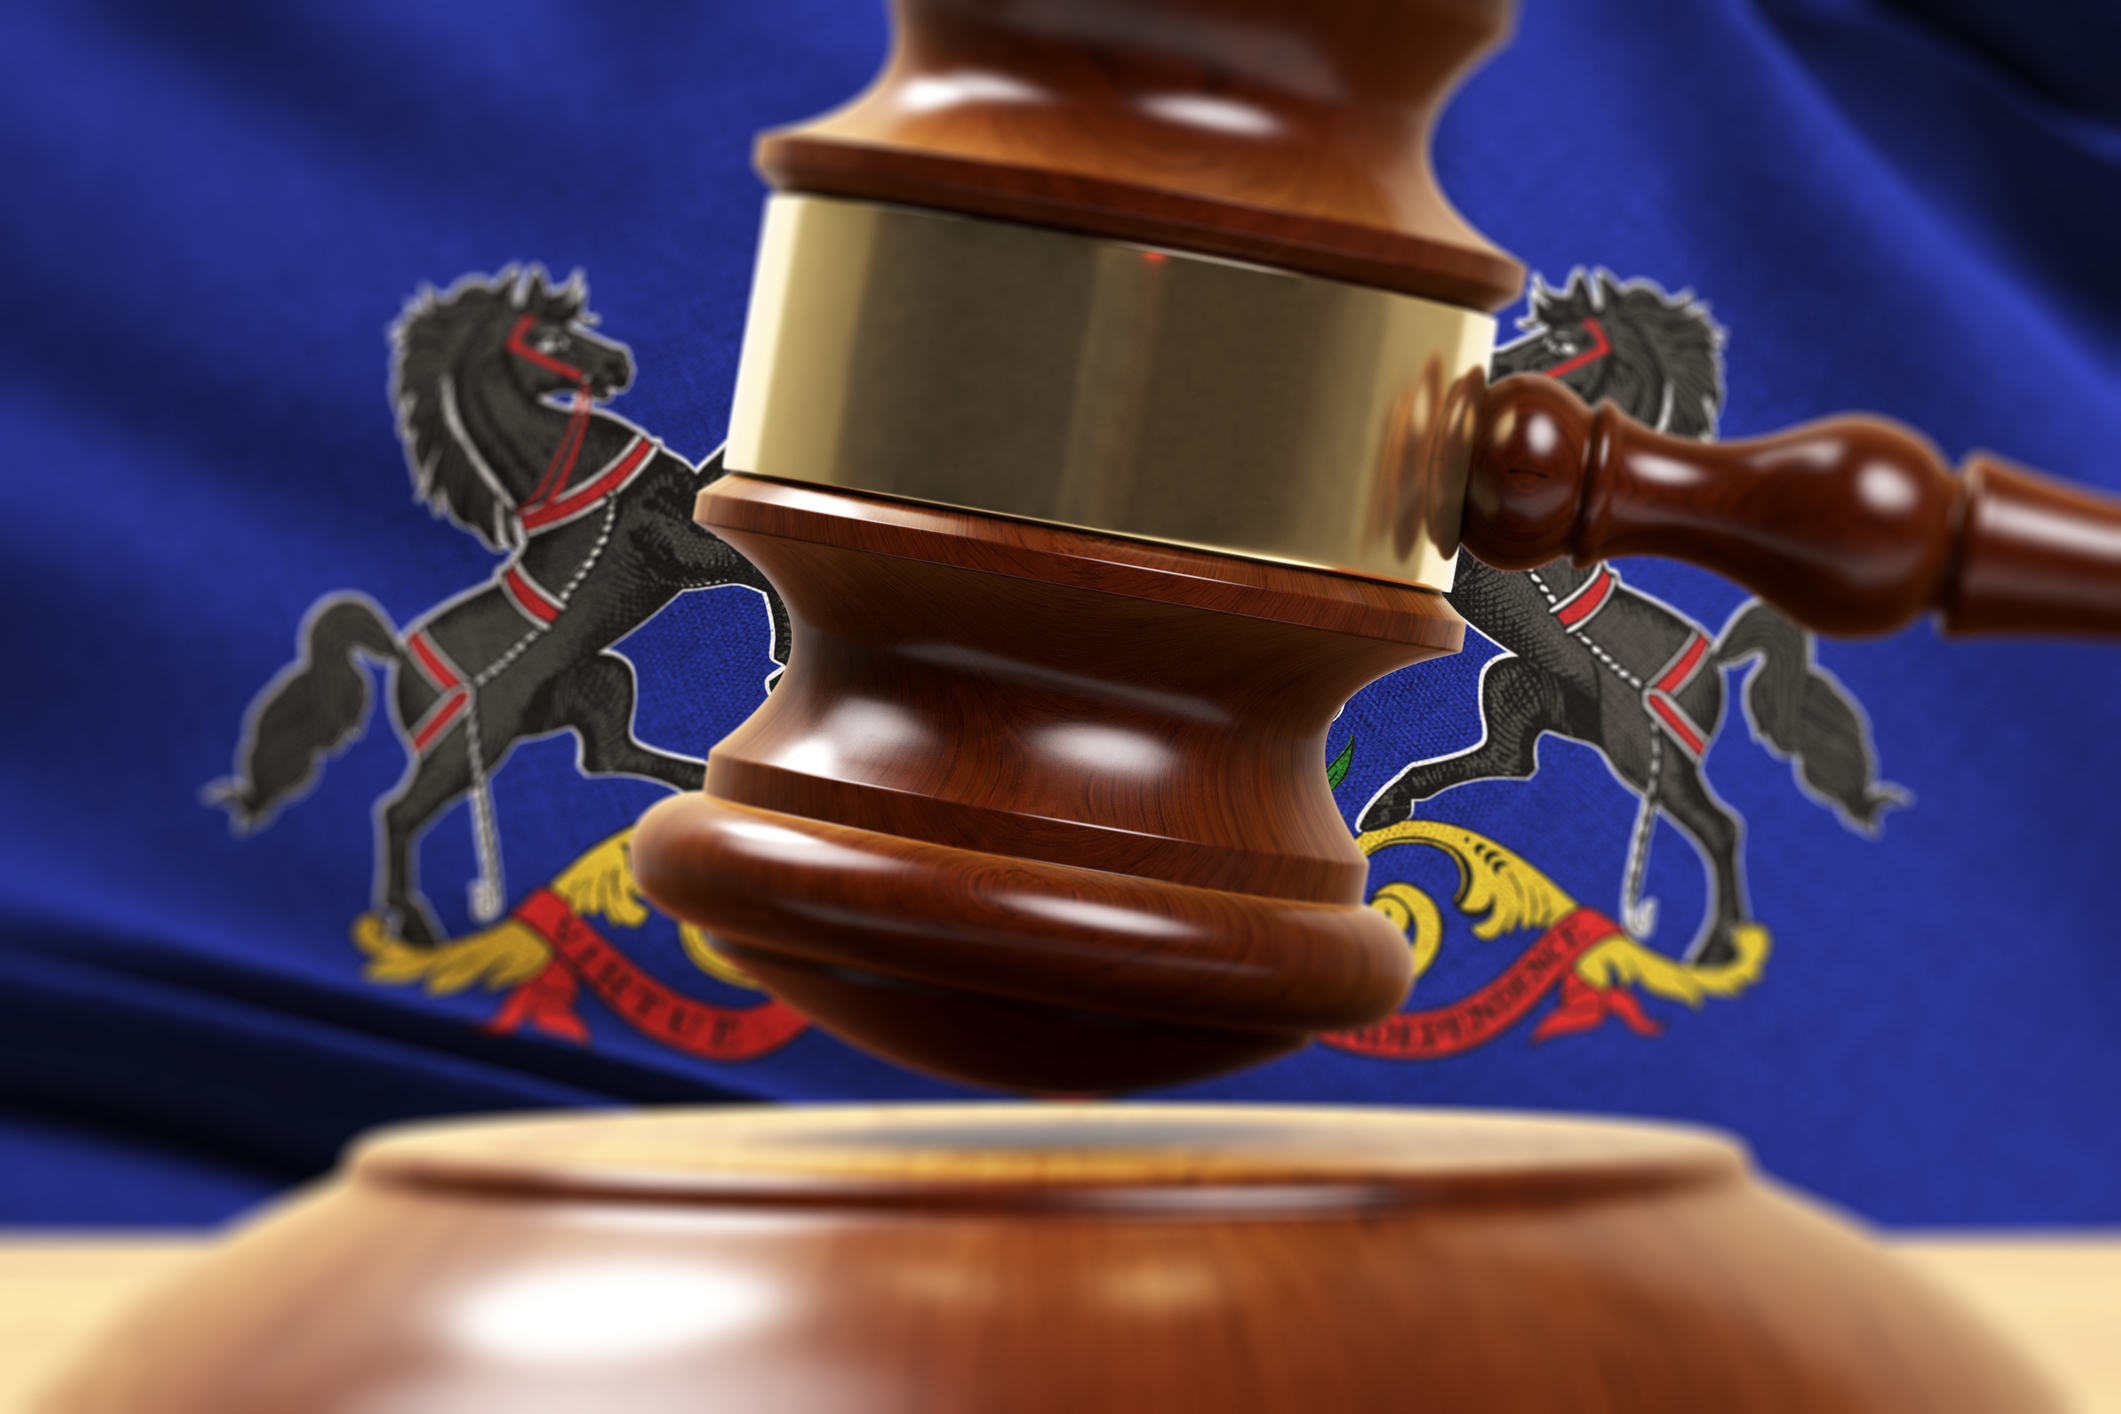 State Court Docket Watch: Corman v. Acting Secretary of the Pennsylvania Department of Health